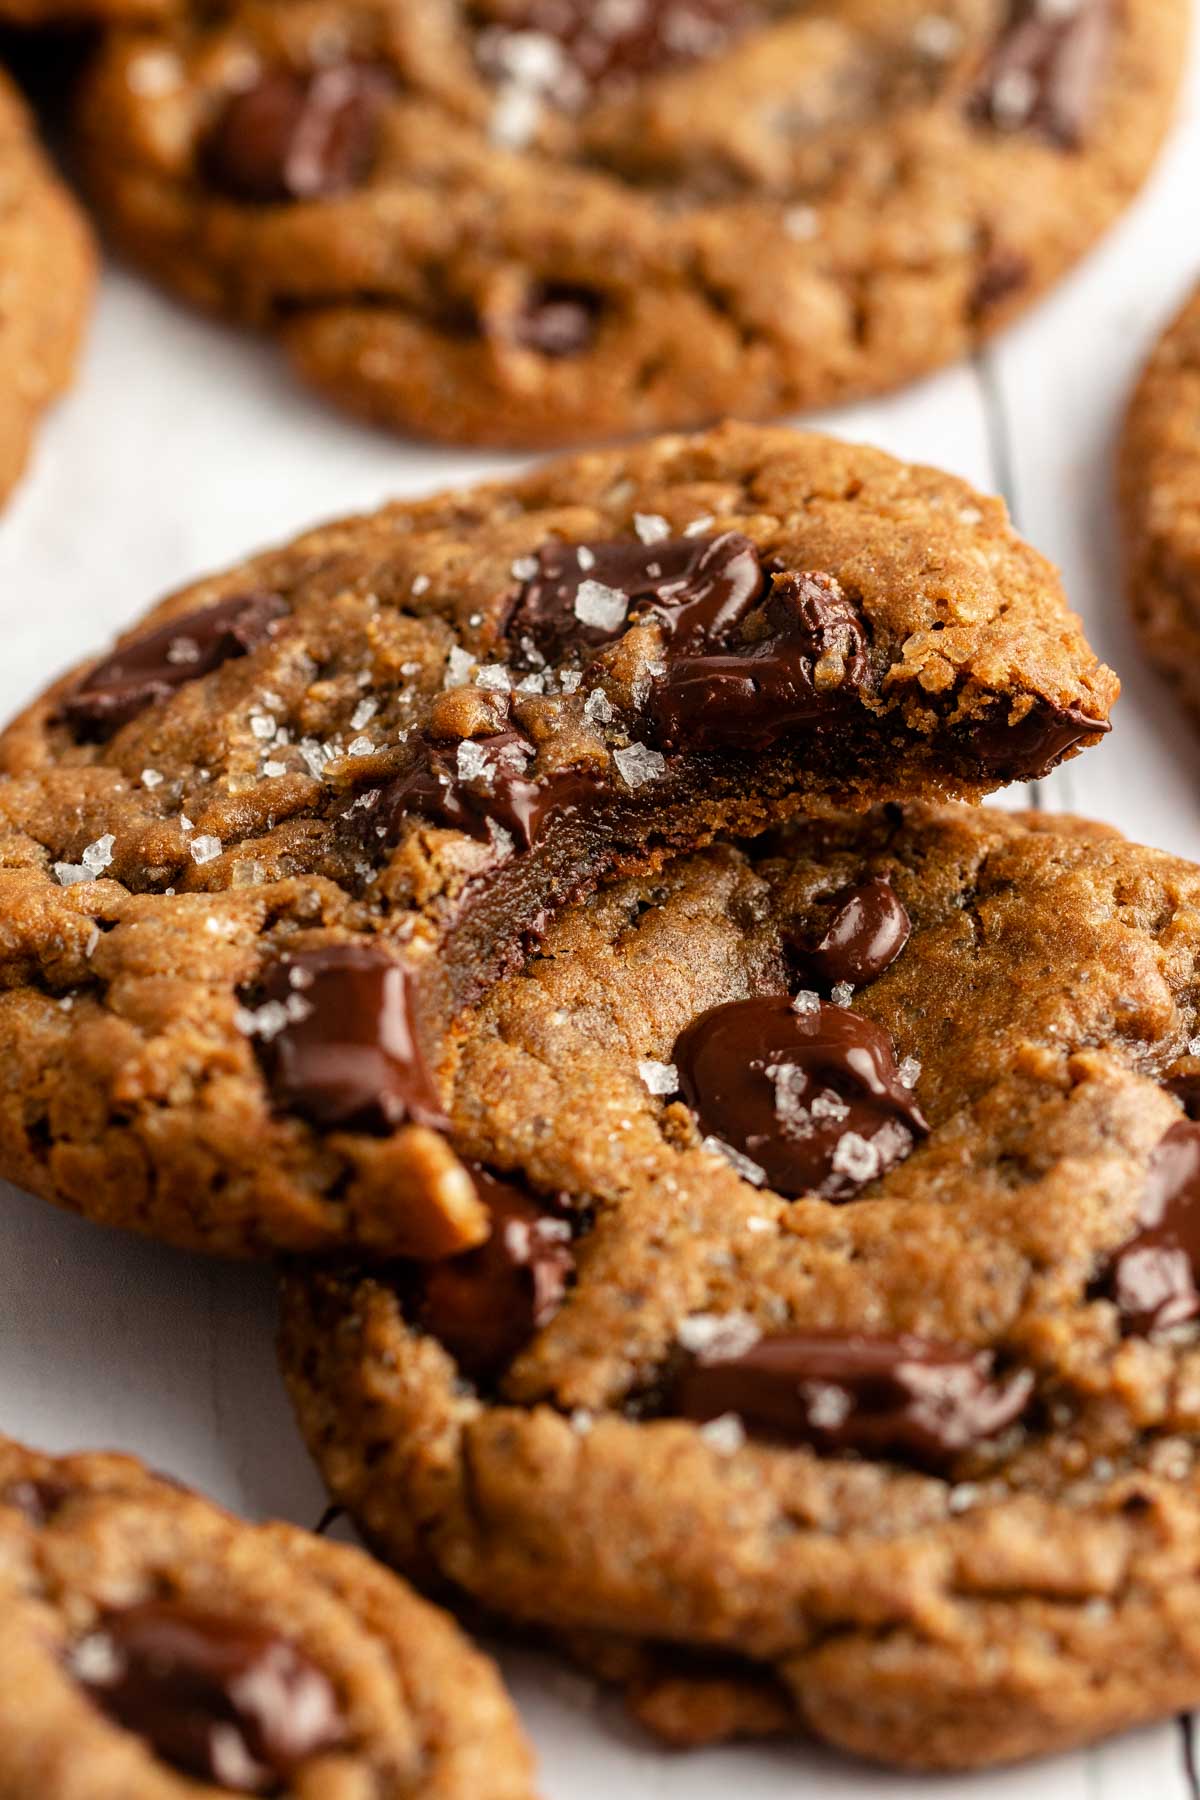 Super close up of a cookie with a bite missing.